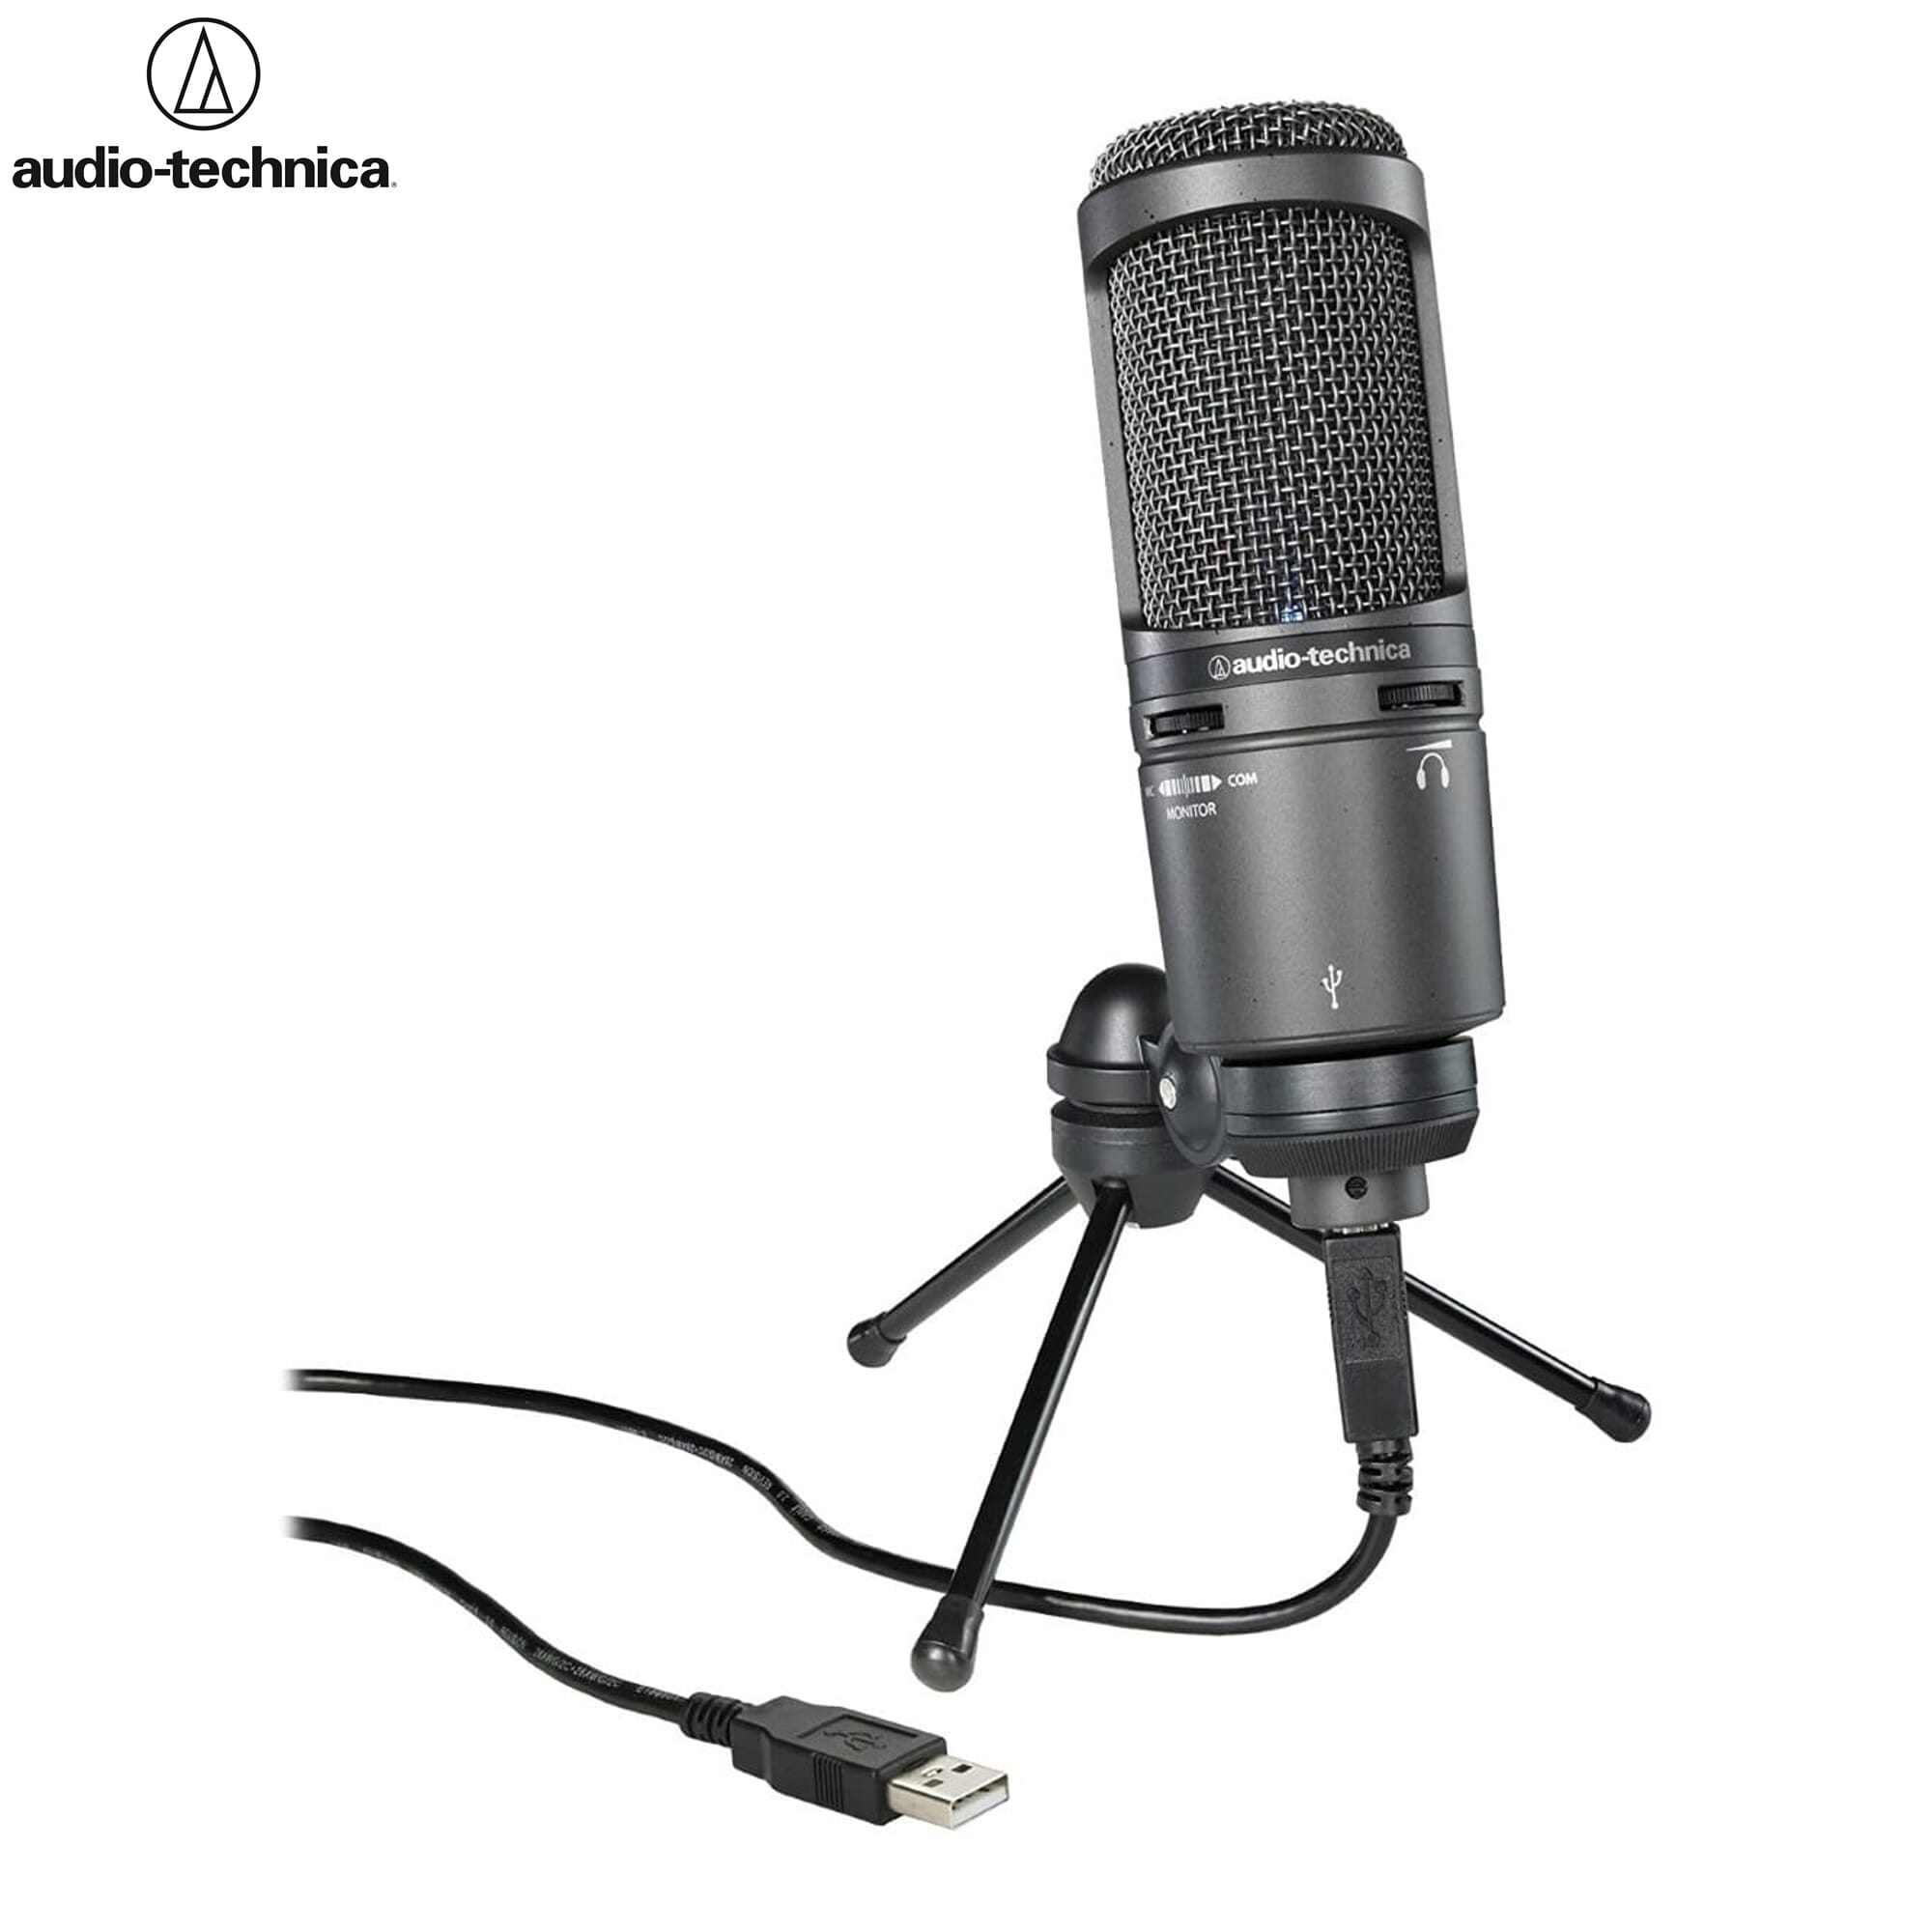 Audio Technica AT2040 podcast microphone review: an affordable mic fit for  radio